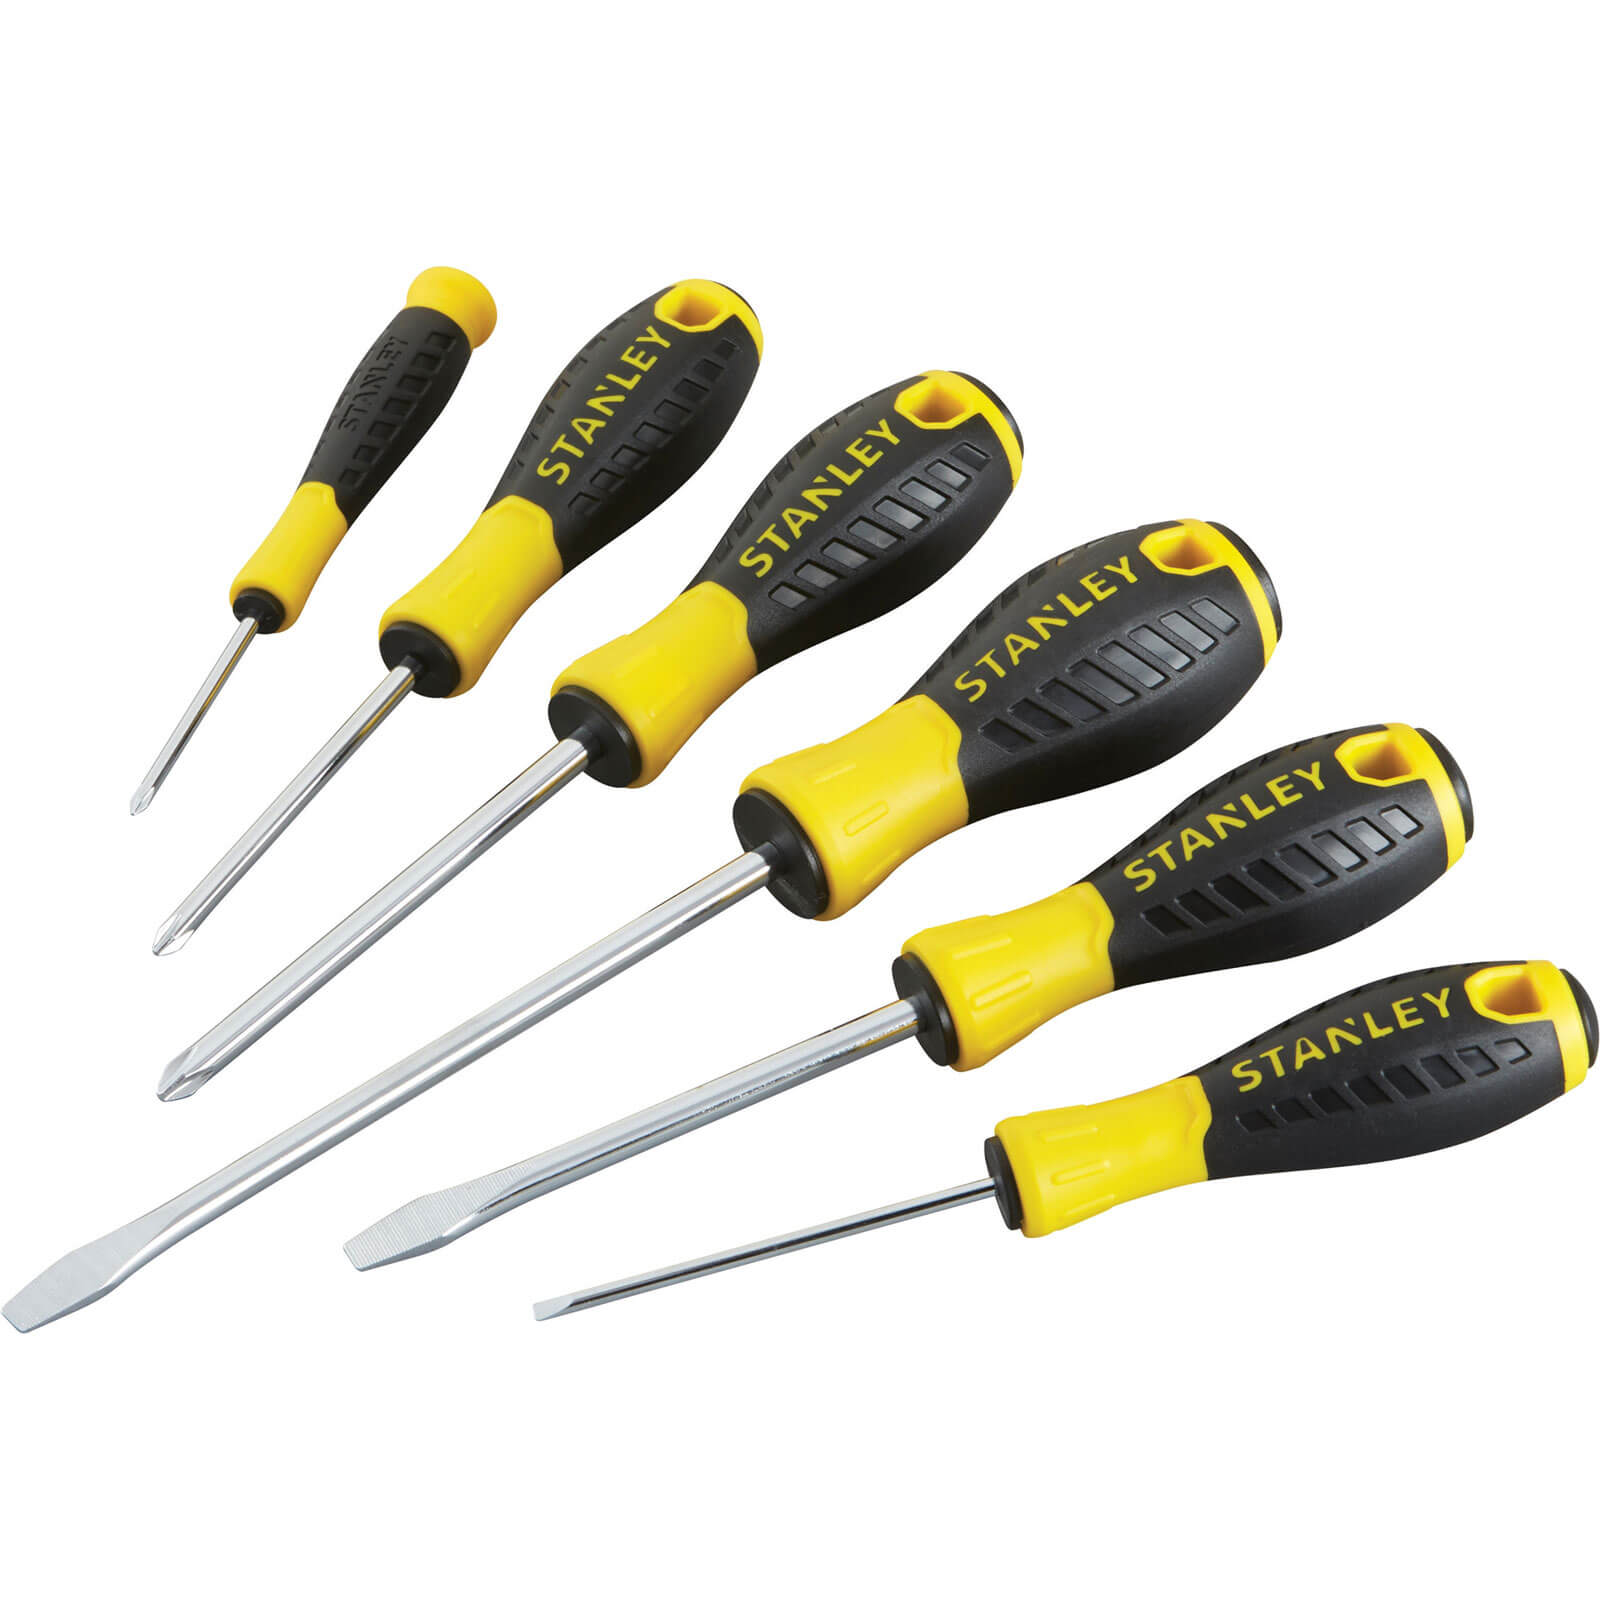 Image of Stanley 6 Piece Essential Phillips and Slotted Screwdriver Set